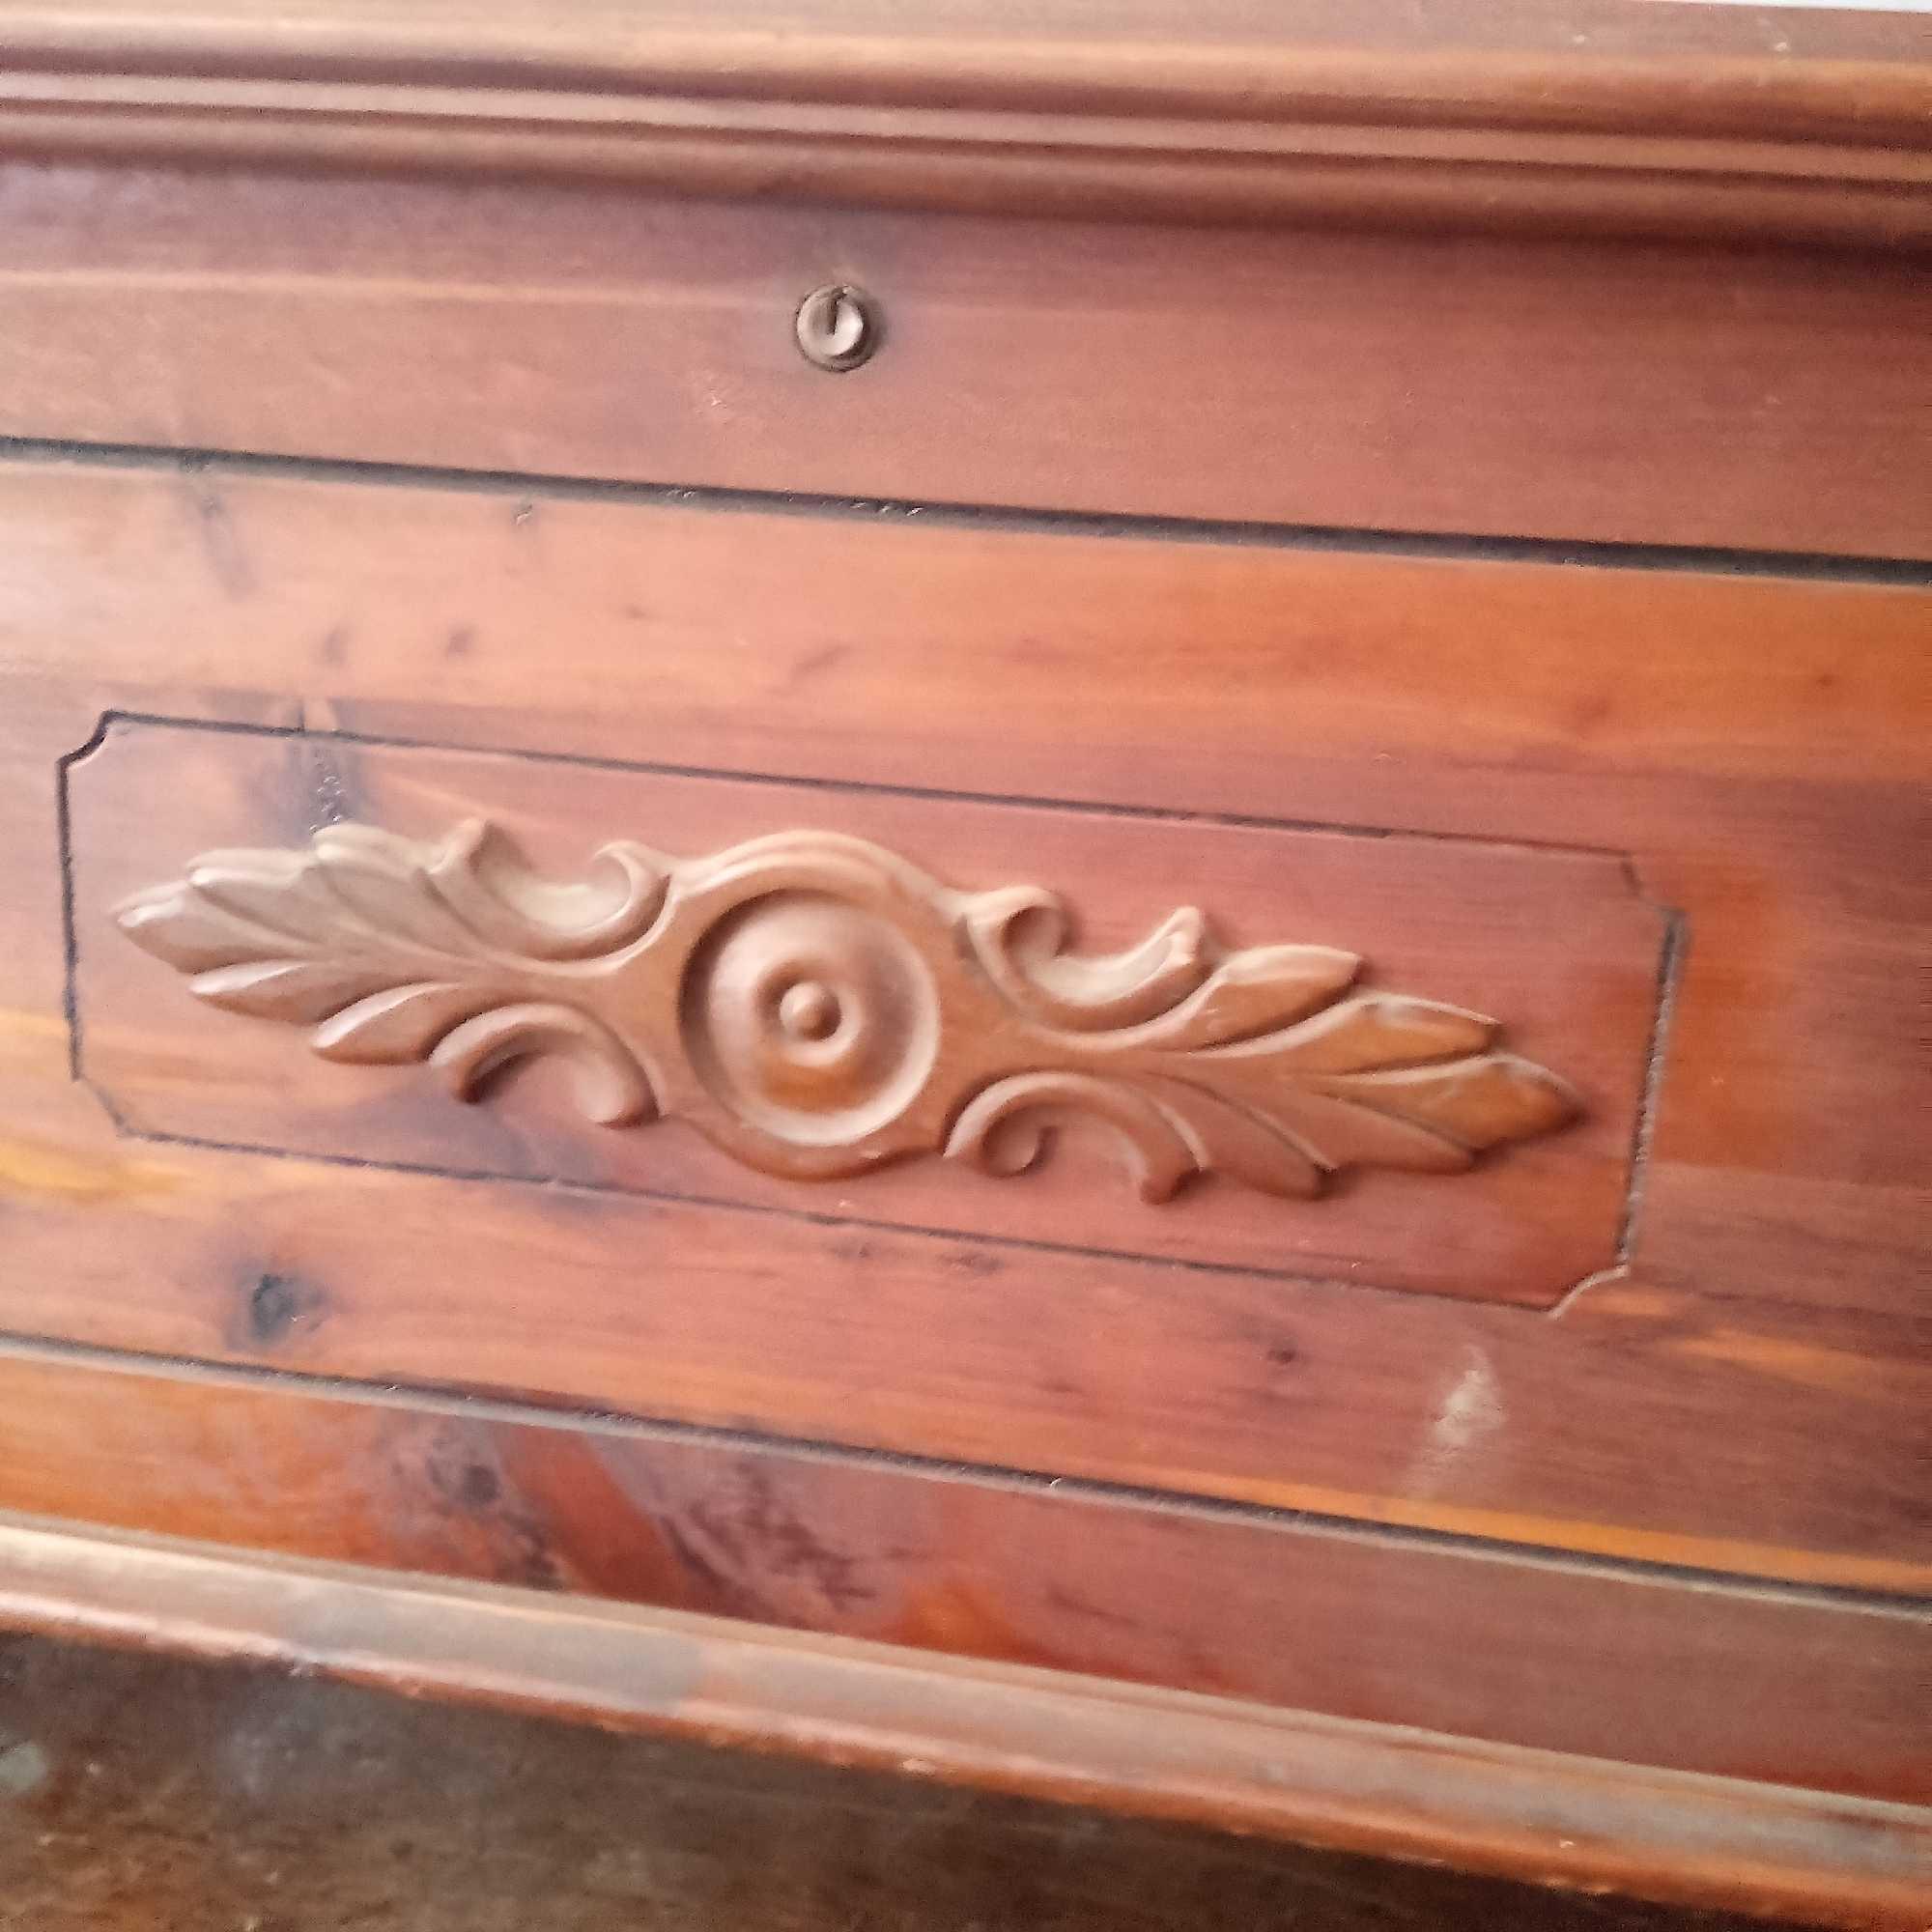 GORGEOUS CEDAR HOPE CHEST! SMELLS SO GOOD! WITH FEATHER EYE ACCENT